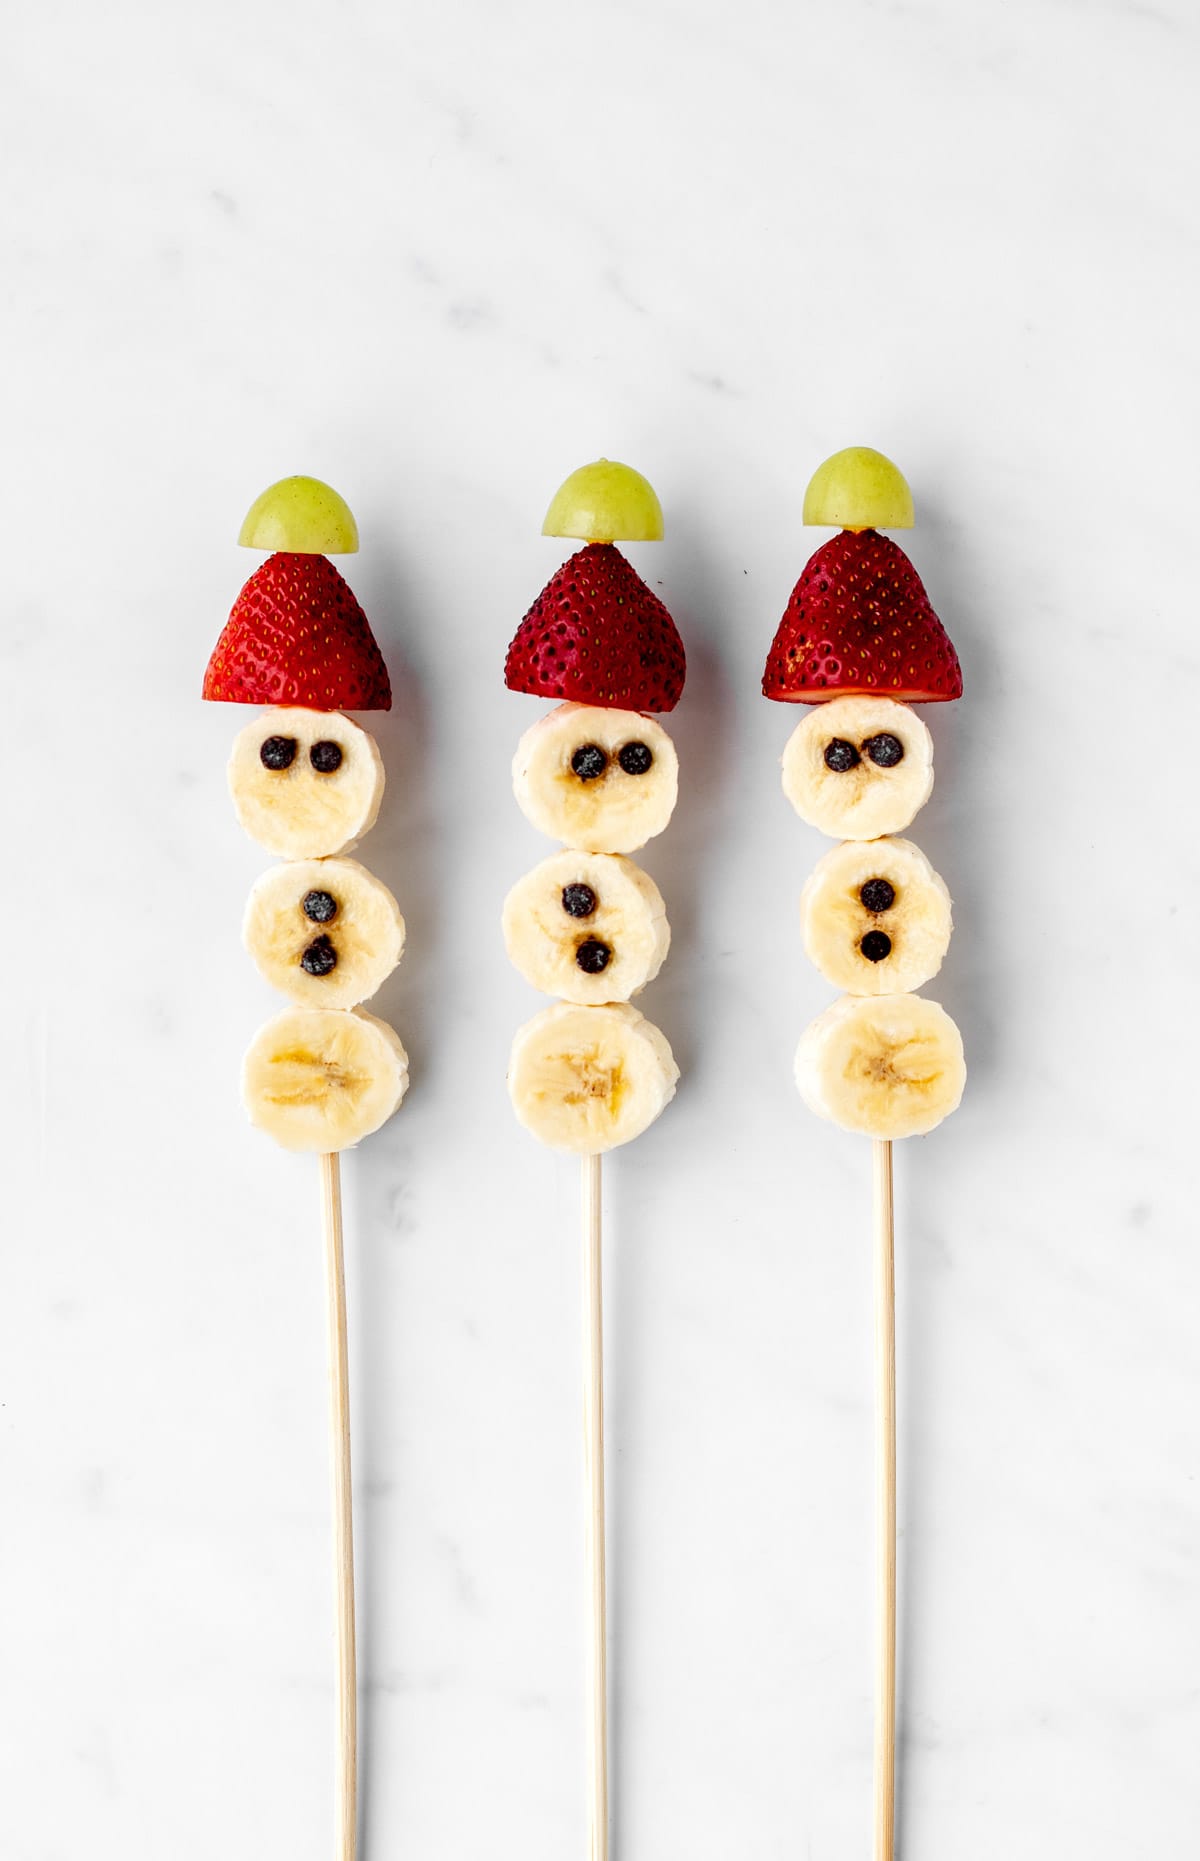 Banana snowmen on three sticks with chocolate chips eyes and buttons added.